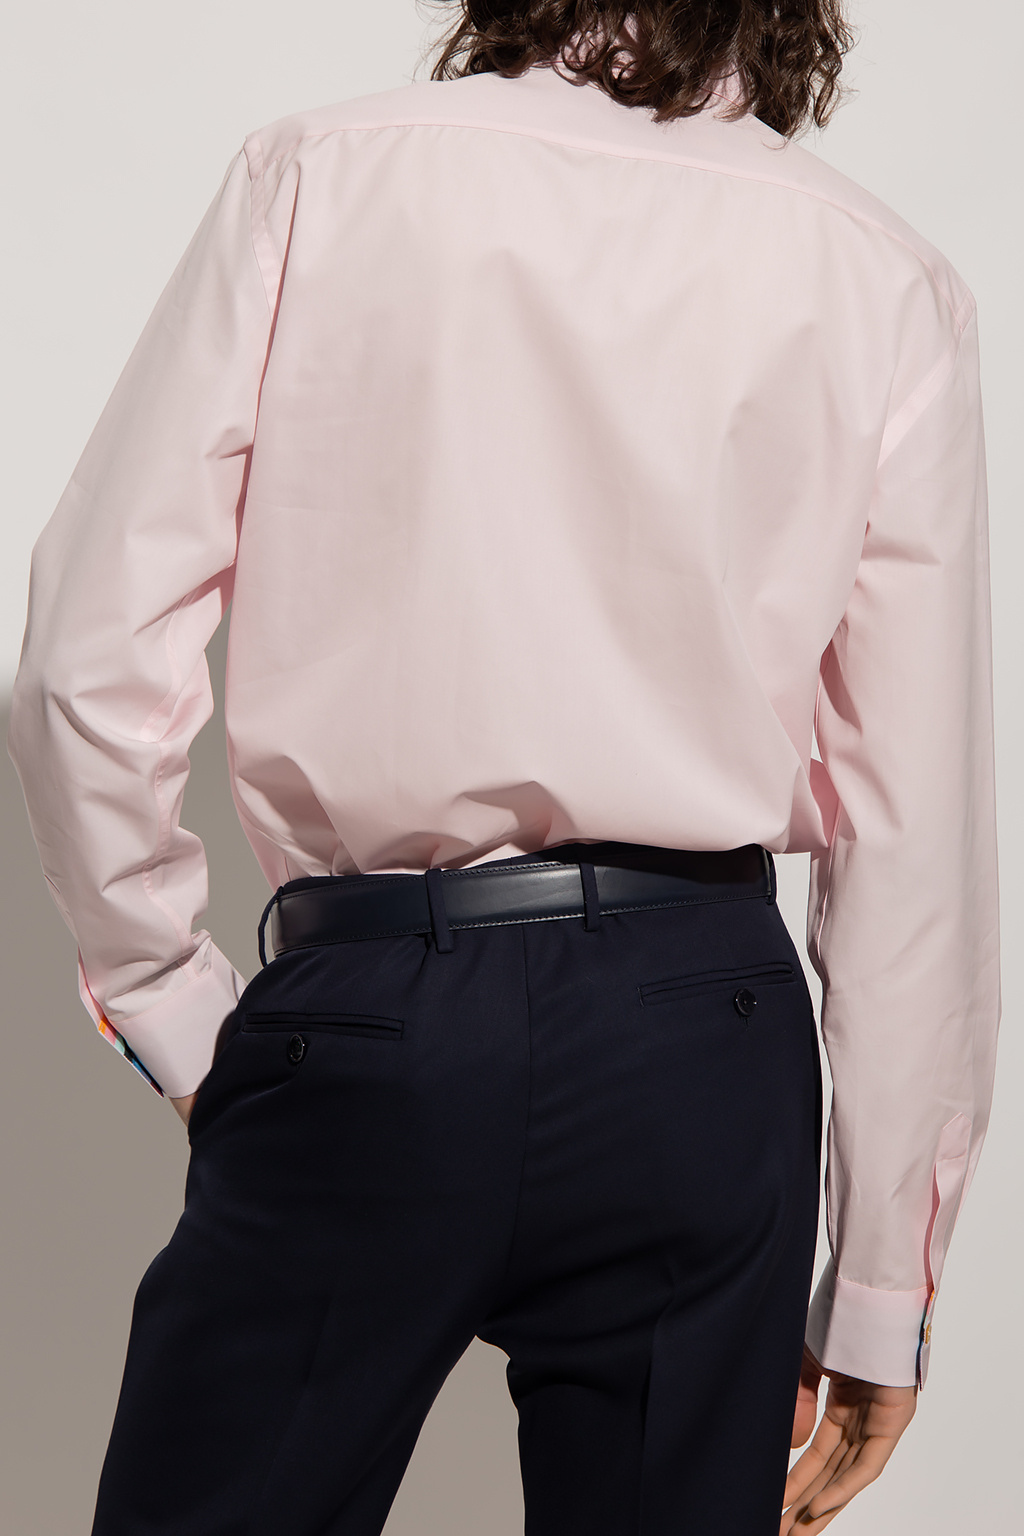 Paul Smith Project shirt